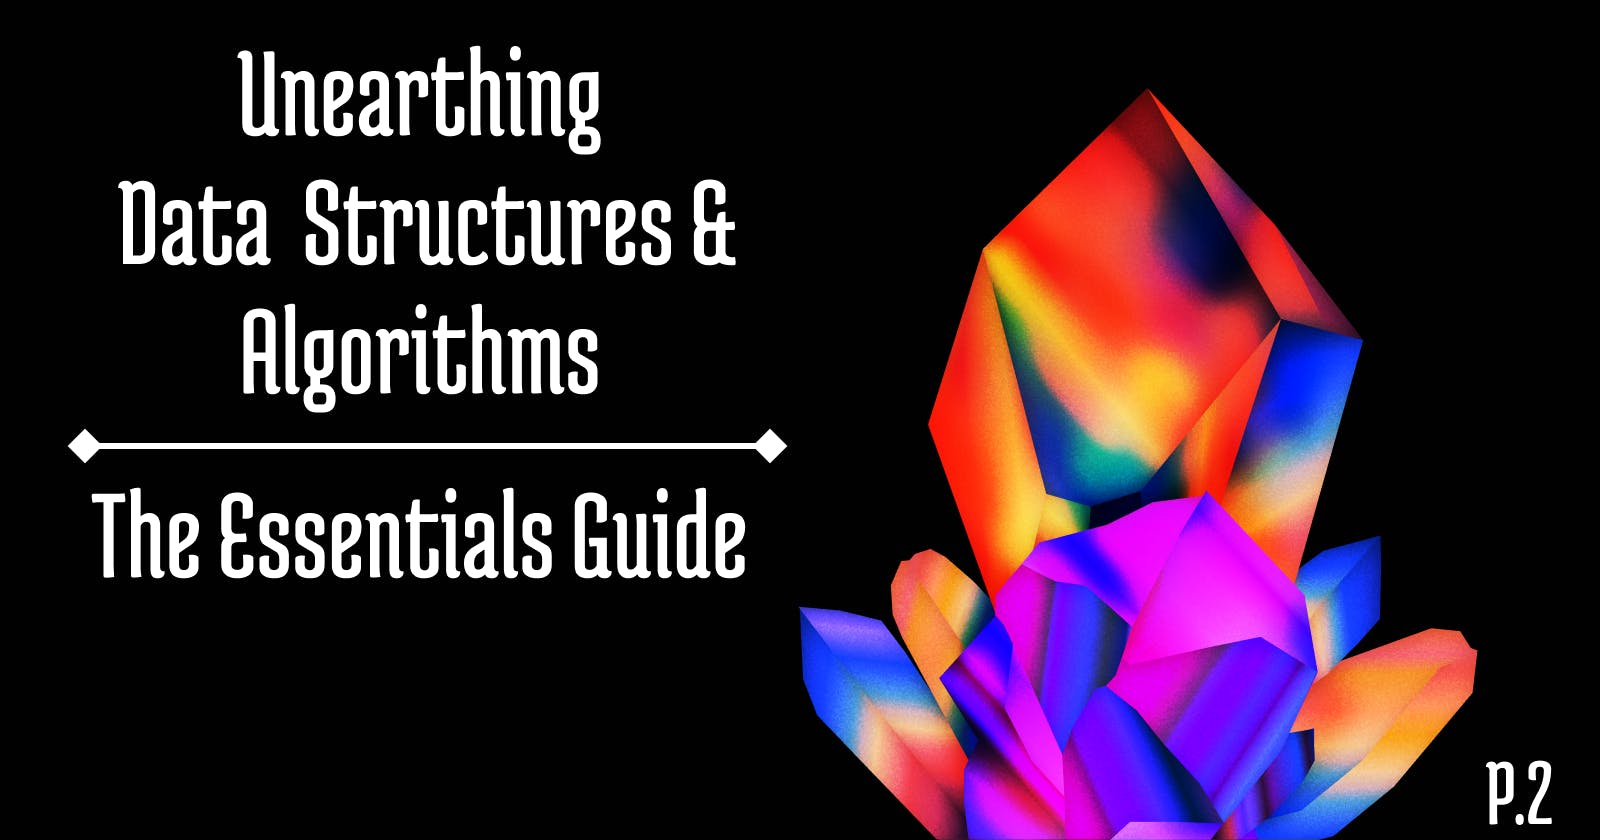 Unearthing Data Structures & Algorithms: The Essentials Guide - Part 2